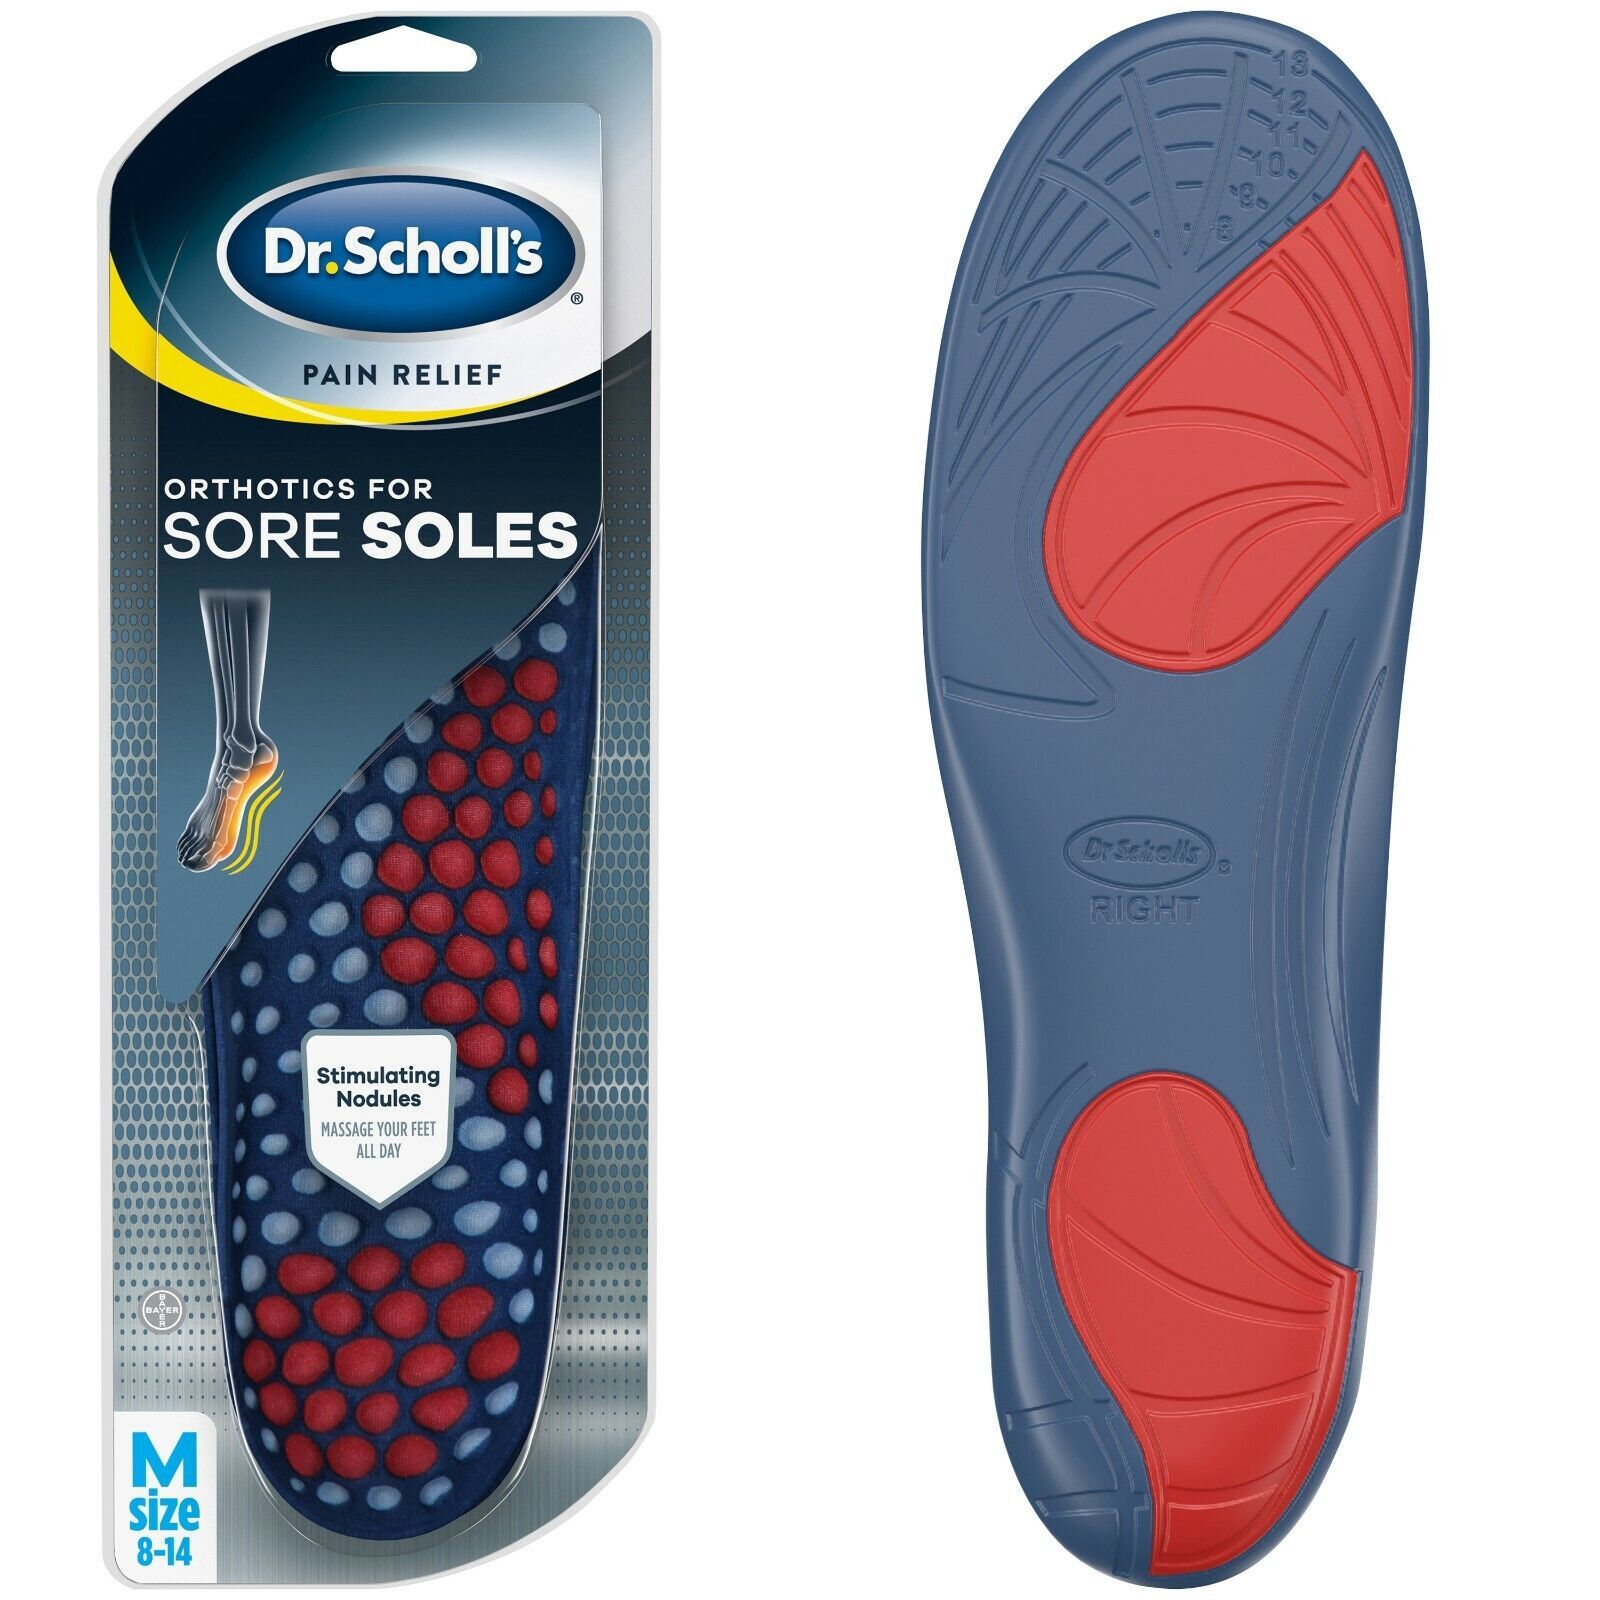 Dr. Scholl's Pain Relief Orthotics for Sore Soles for Men, 1 Pair, Size 8-14..+ - $29.69